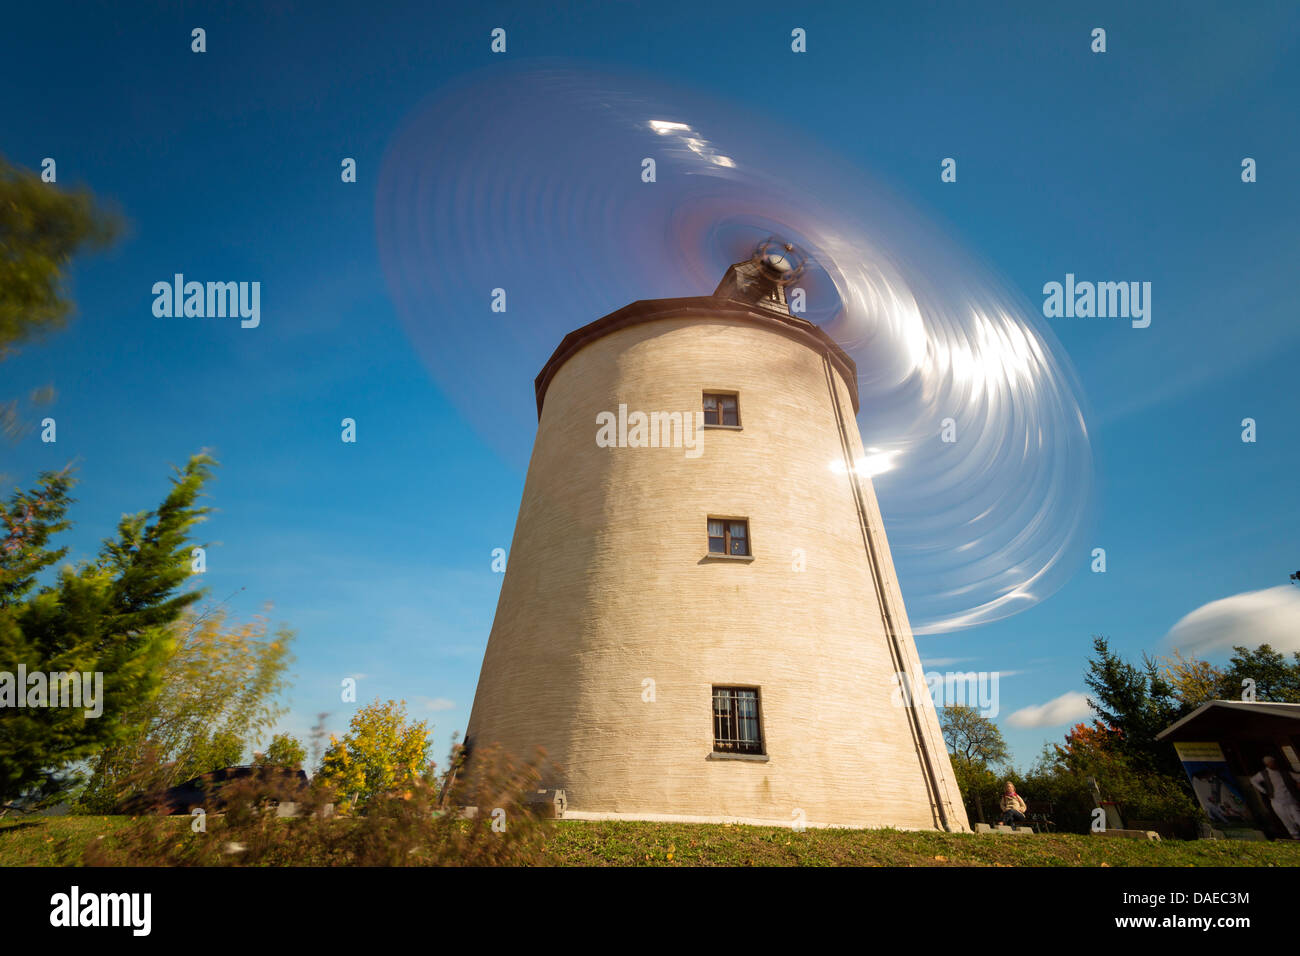 windmill in motion in long exposure, Germany, Saxony, Vogtland, Syrau Stock Photo